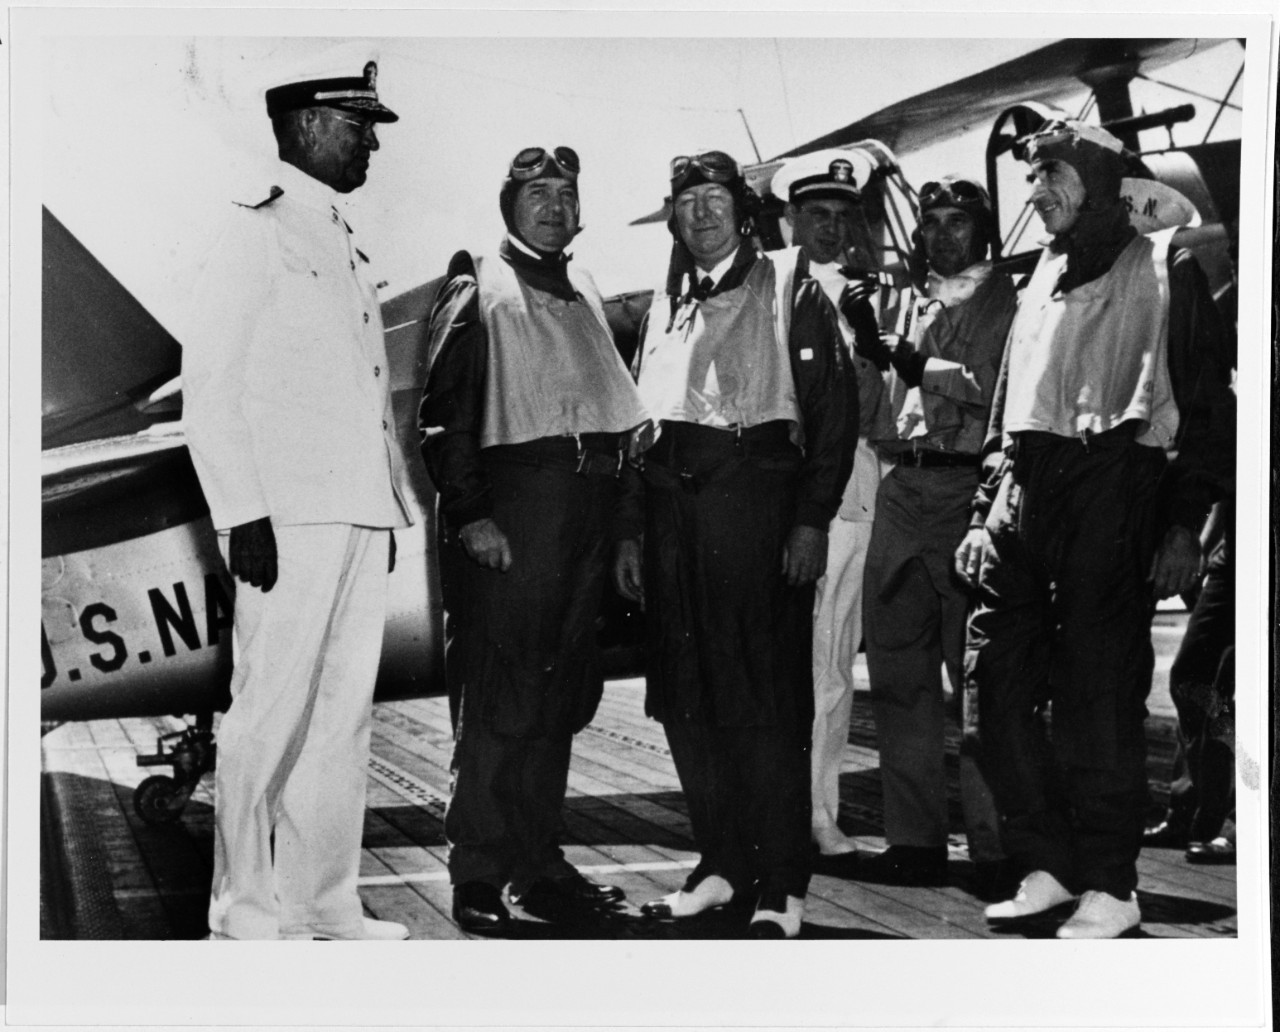 Secretary of the Navy Frank Knox (center) prepares for his flight from Enterprise to NAS Pearl Harbor, 13 September 1940. Additional men in the picture include: Adm. Richardson (left); Cmdr. Morton L. Deyo; and Lt. Cmdr. Edward C. Ewen, Enterpris...